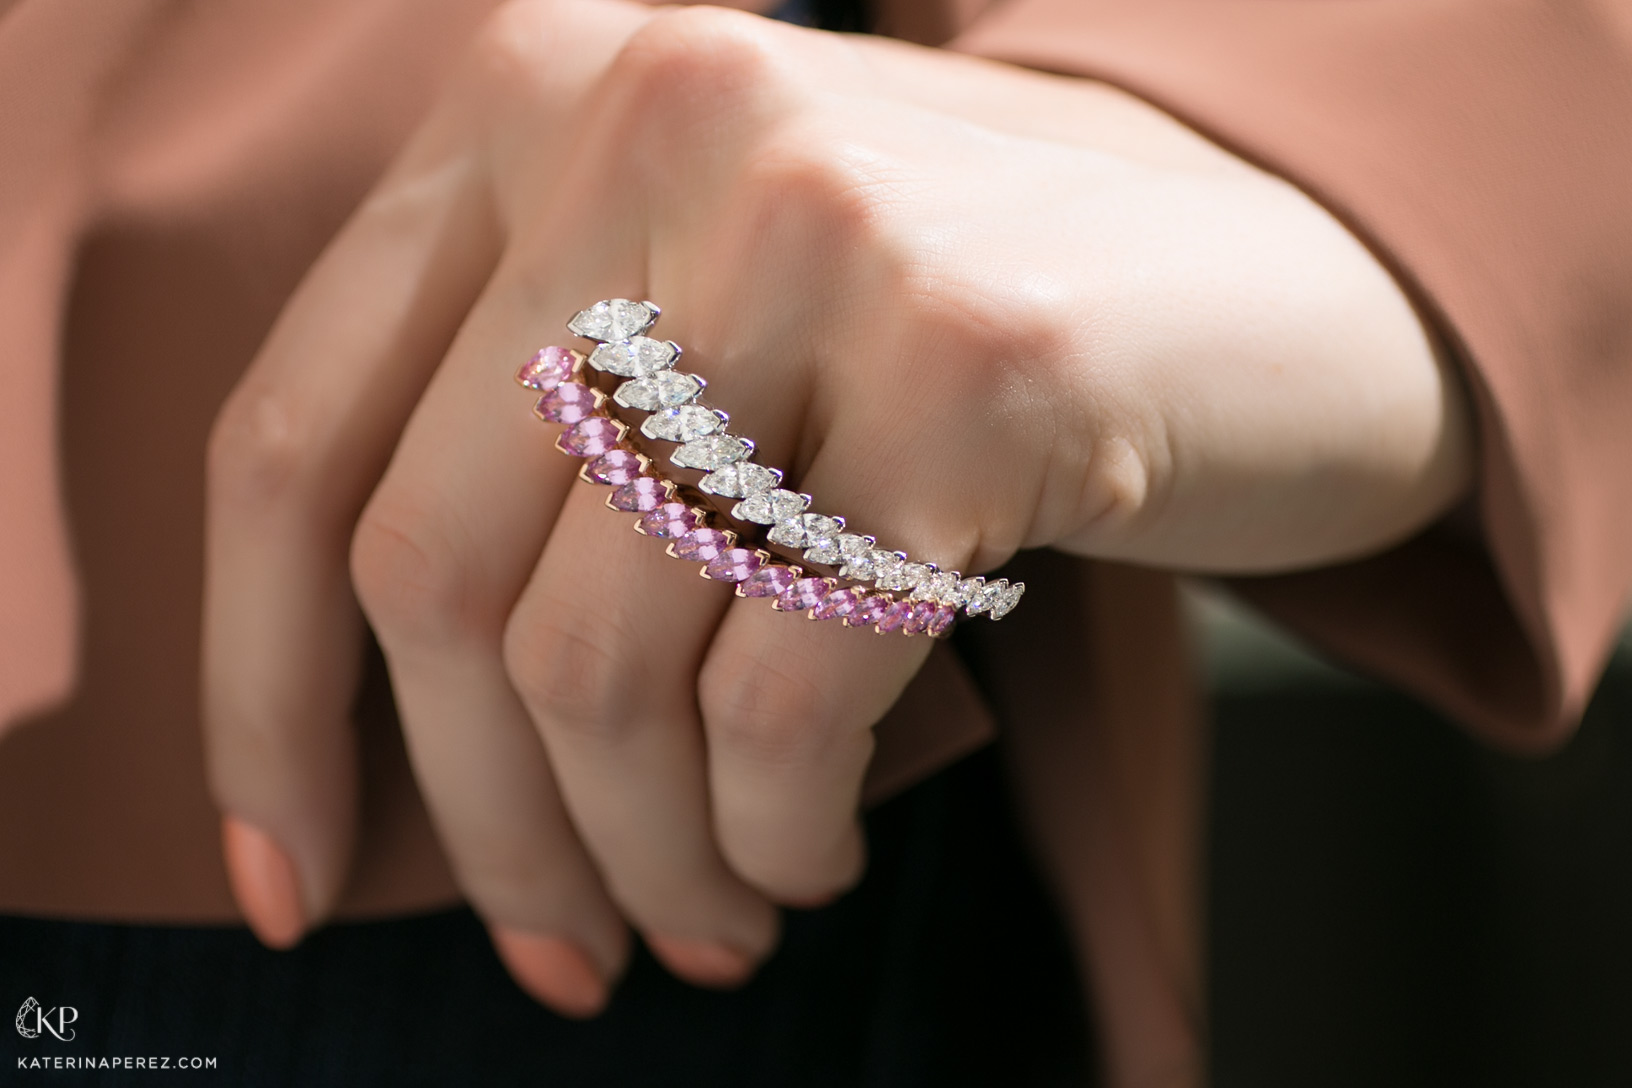 Baenteli 'Cascades' double finger rings in pink sapphires and diamonds